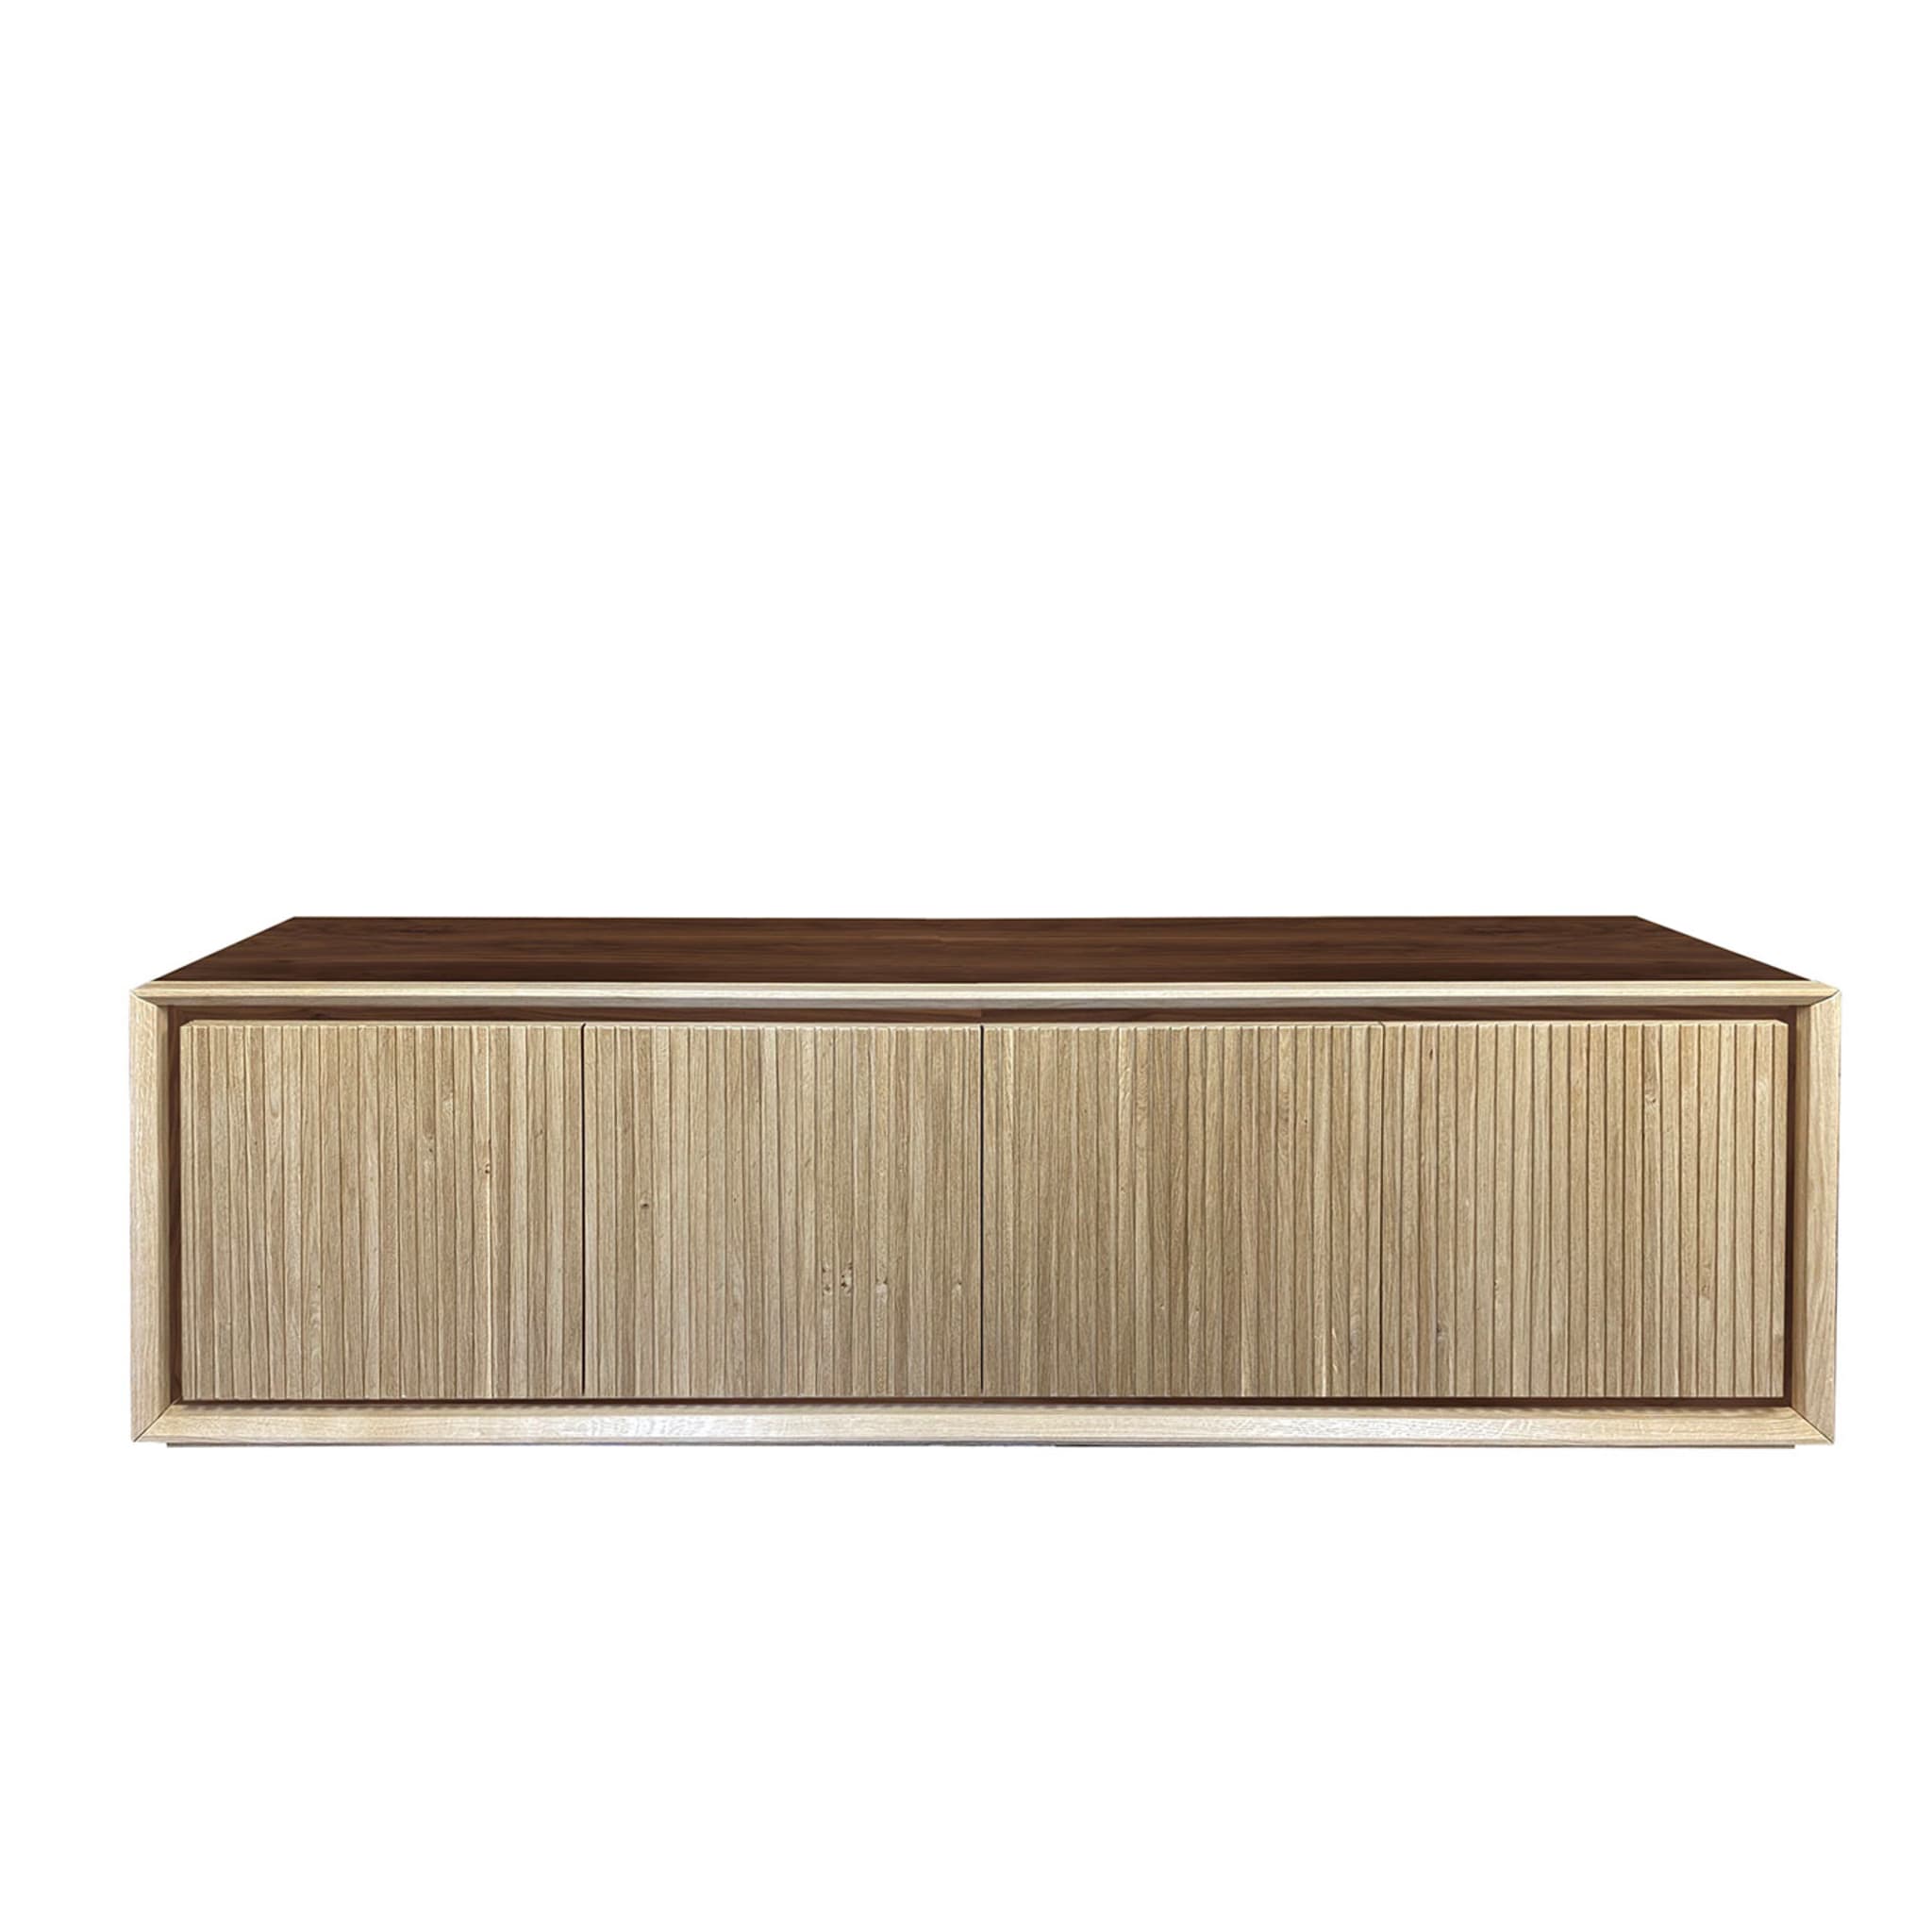 Fuga Noce Uno 4-Door Grooved Sideboard by Mascia Meccani - Alternative view 1